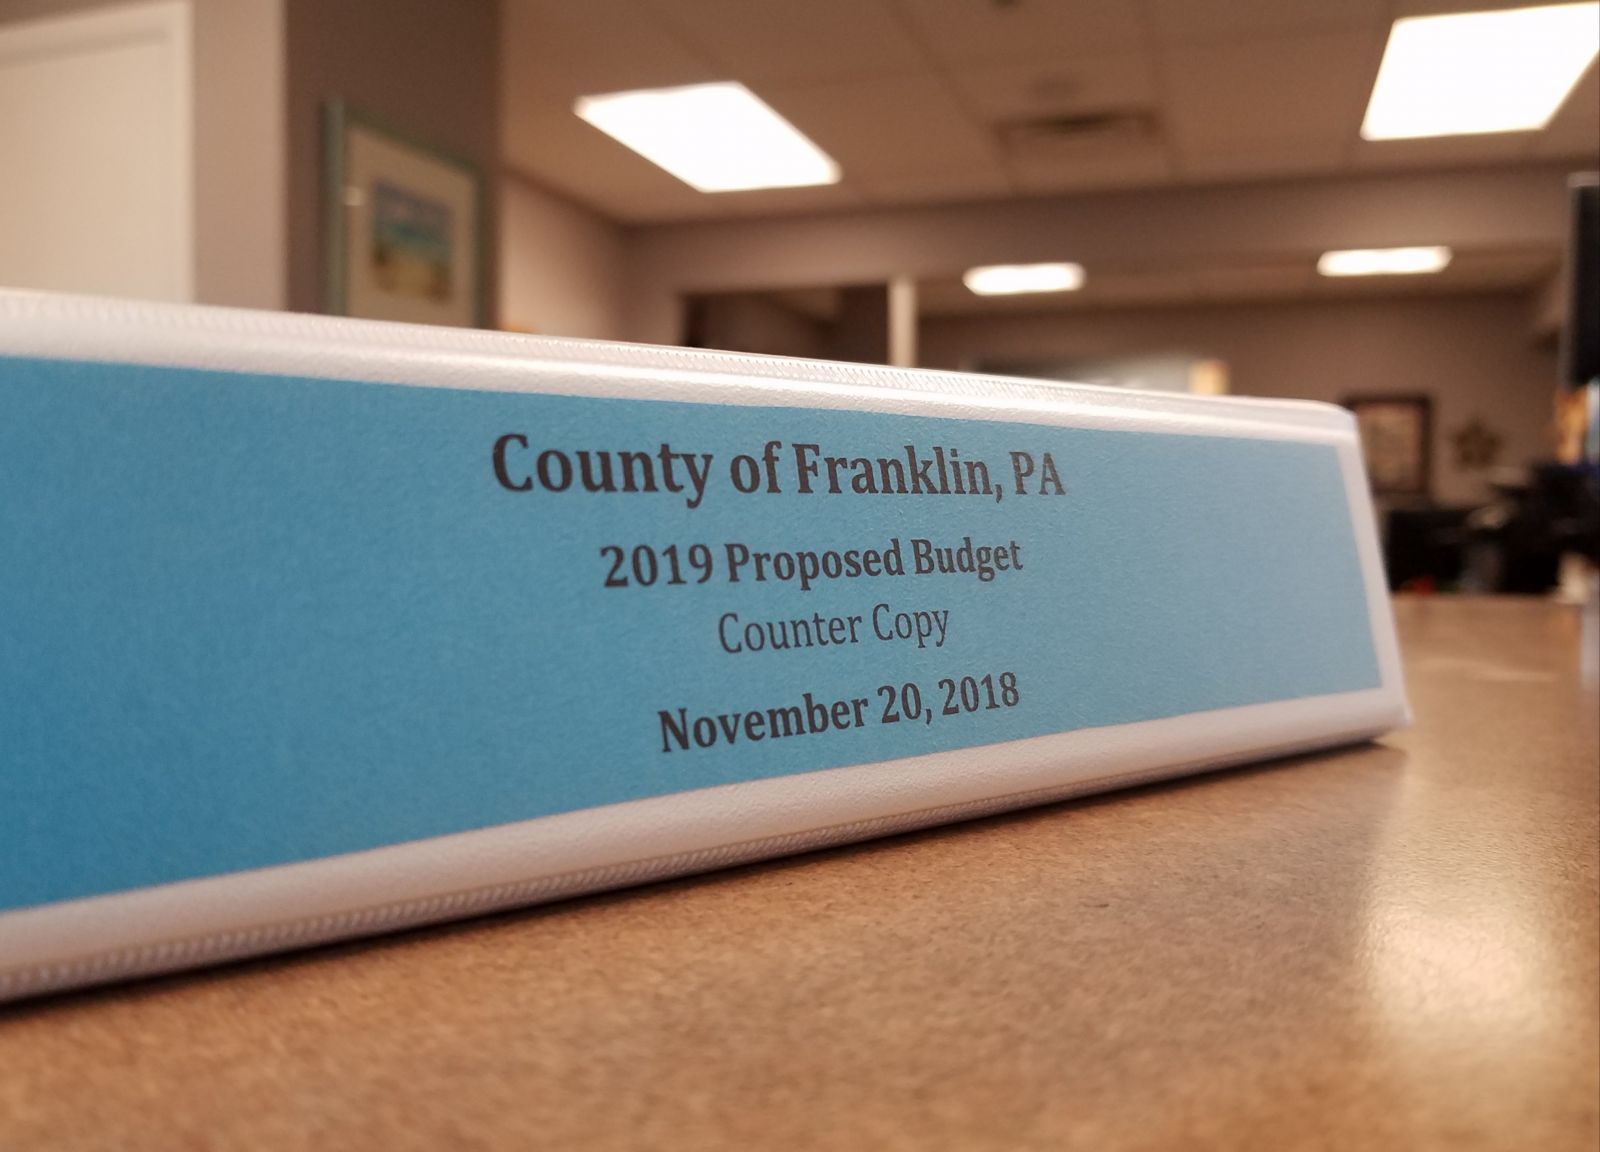 Counter Copy of the 2019 Proposed Budget for Franklin County at the Commissioners Office at 340 N. Second Street.